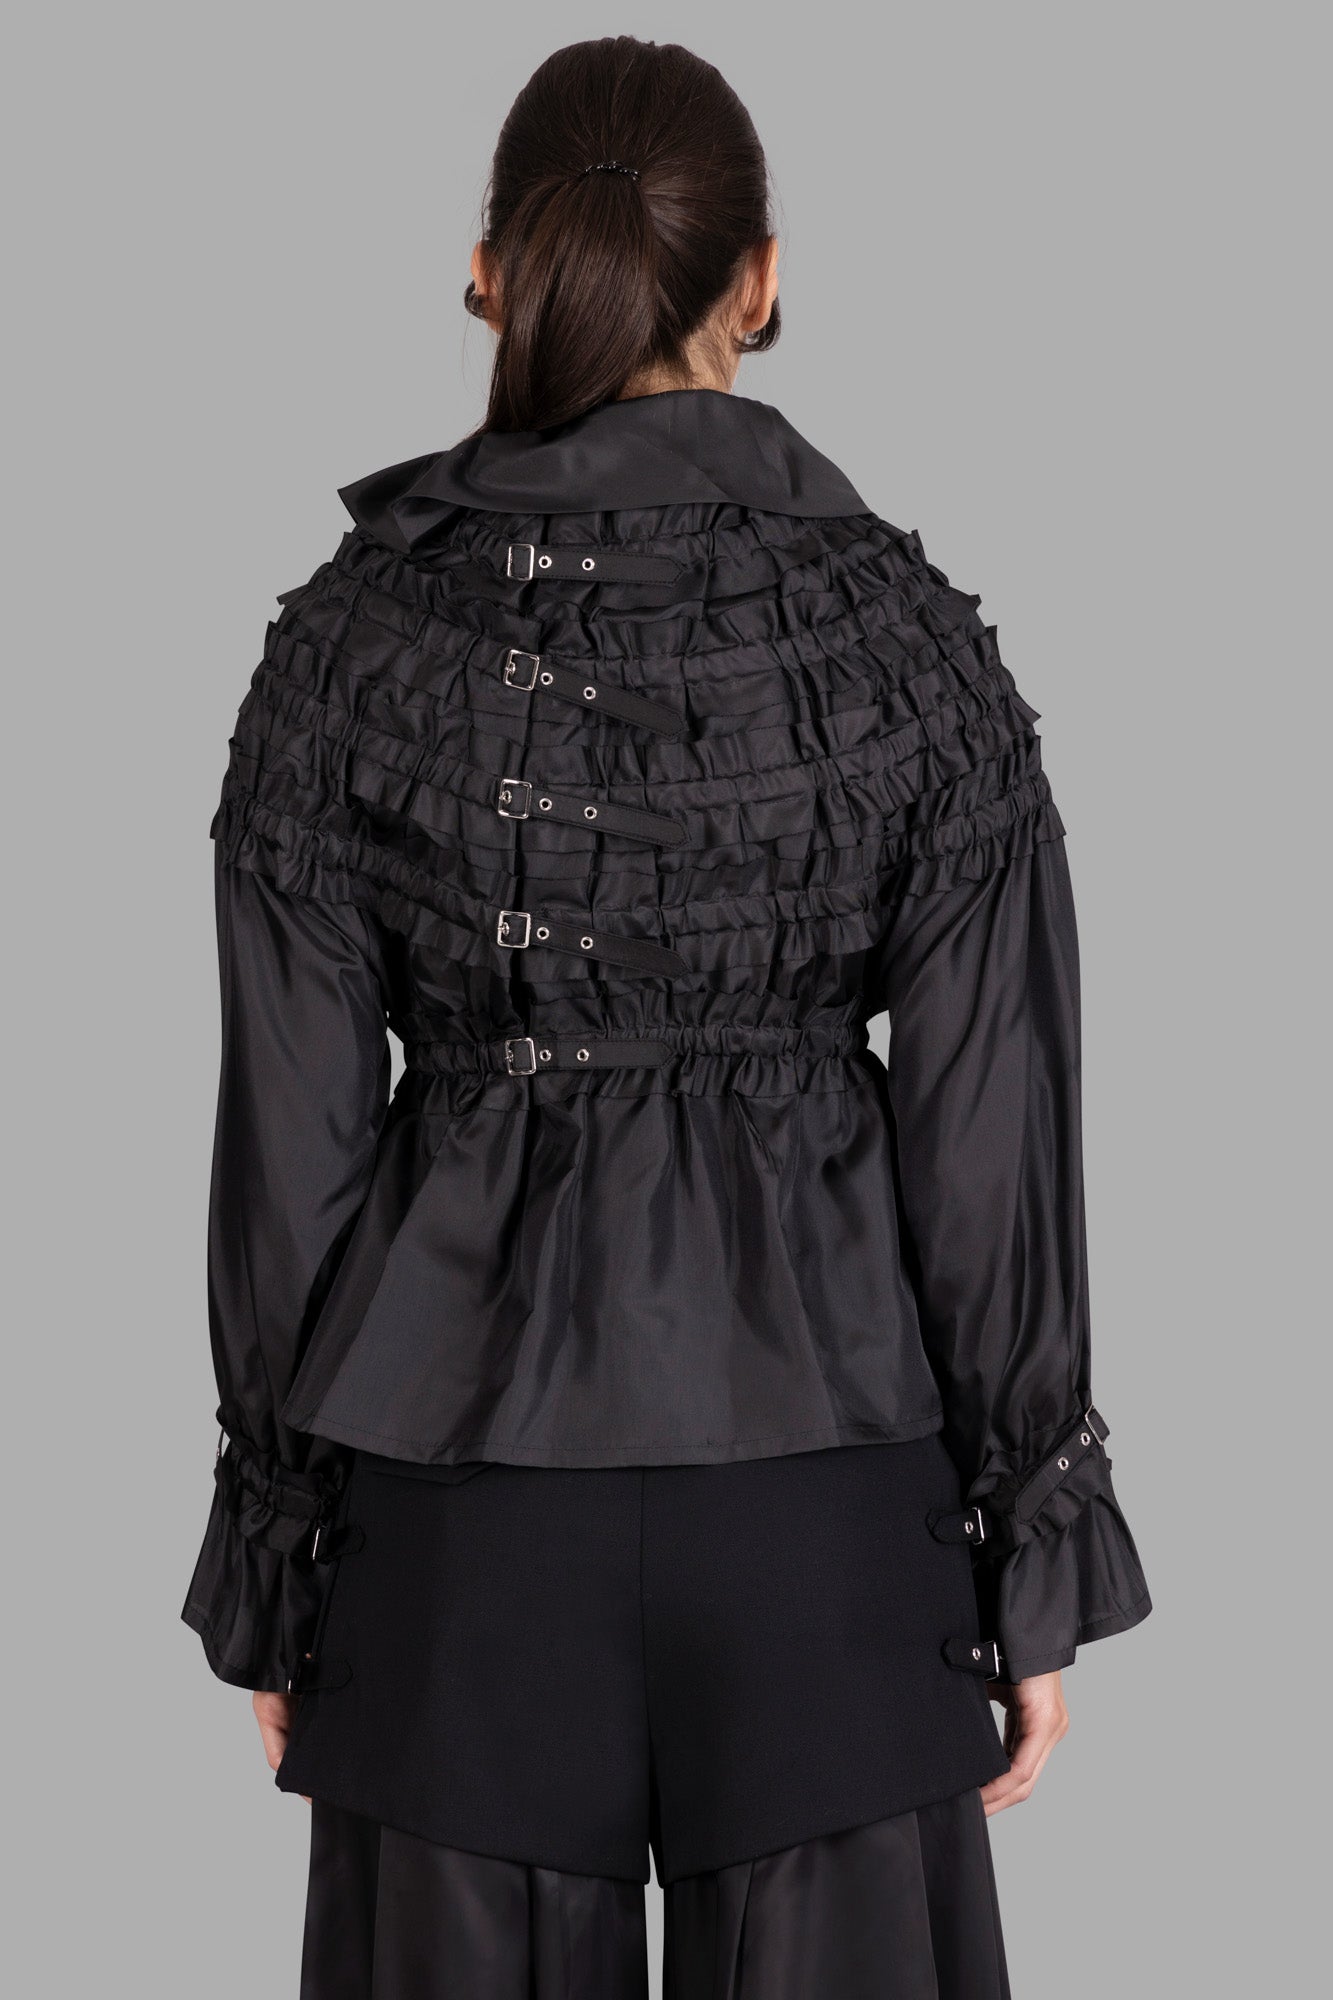 Buckled Ruffled Blouse